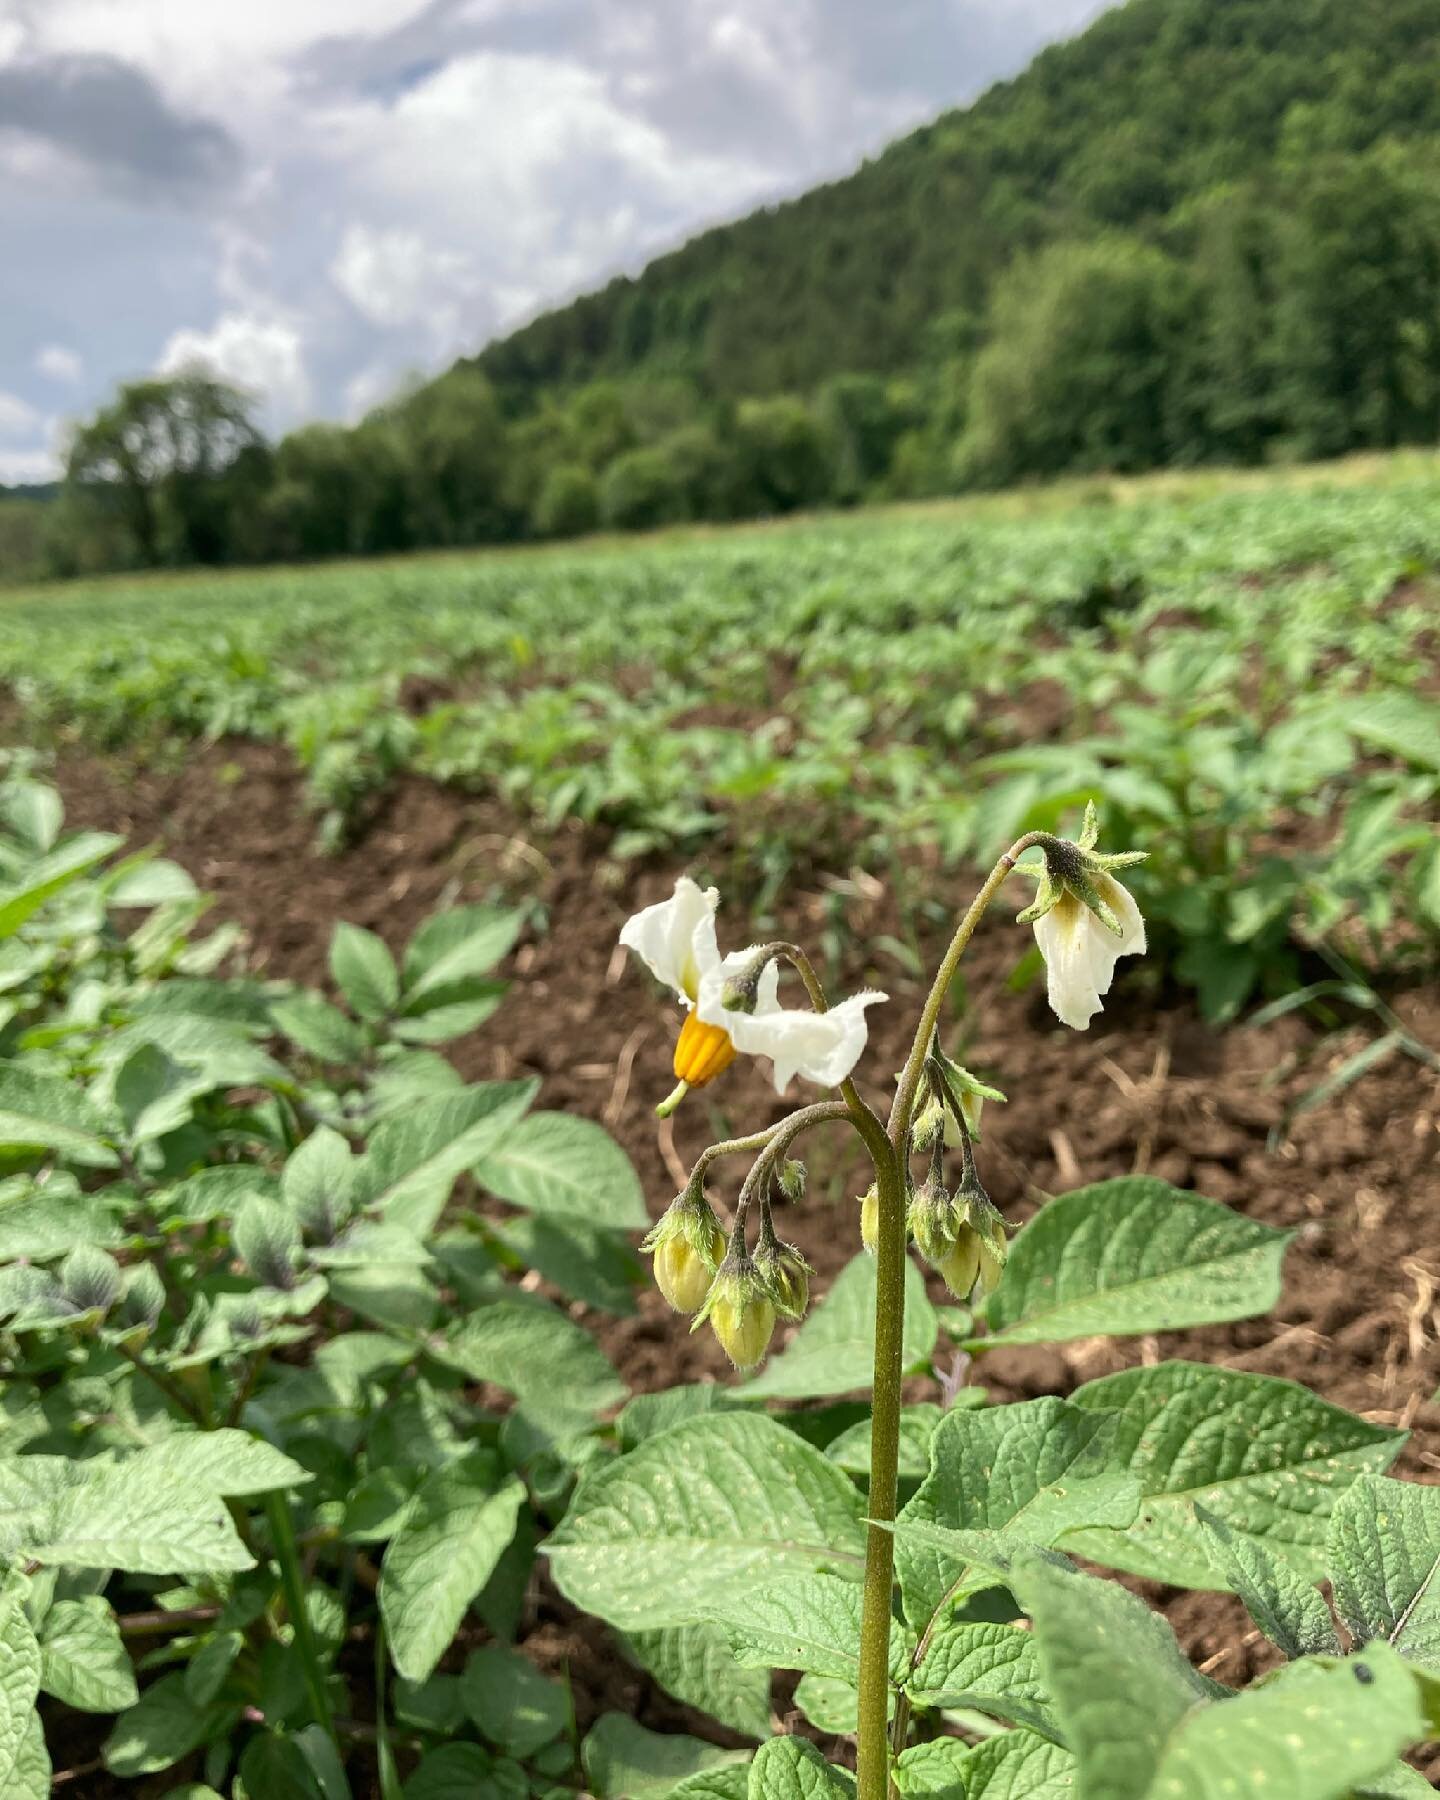 POTATO UPDATE: The Adirondack Blues and Masquerade are beginning to bloom!

This means that we&rsquo;re just a few short weeks away from New Potatoes, just in time for the 4th.

There&rsquo;s still plenty of time though to sign up for this year&rsquo